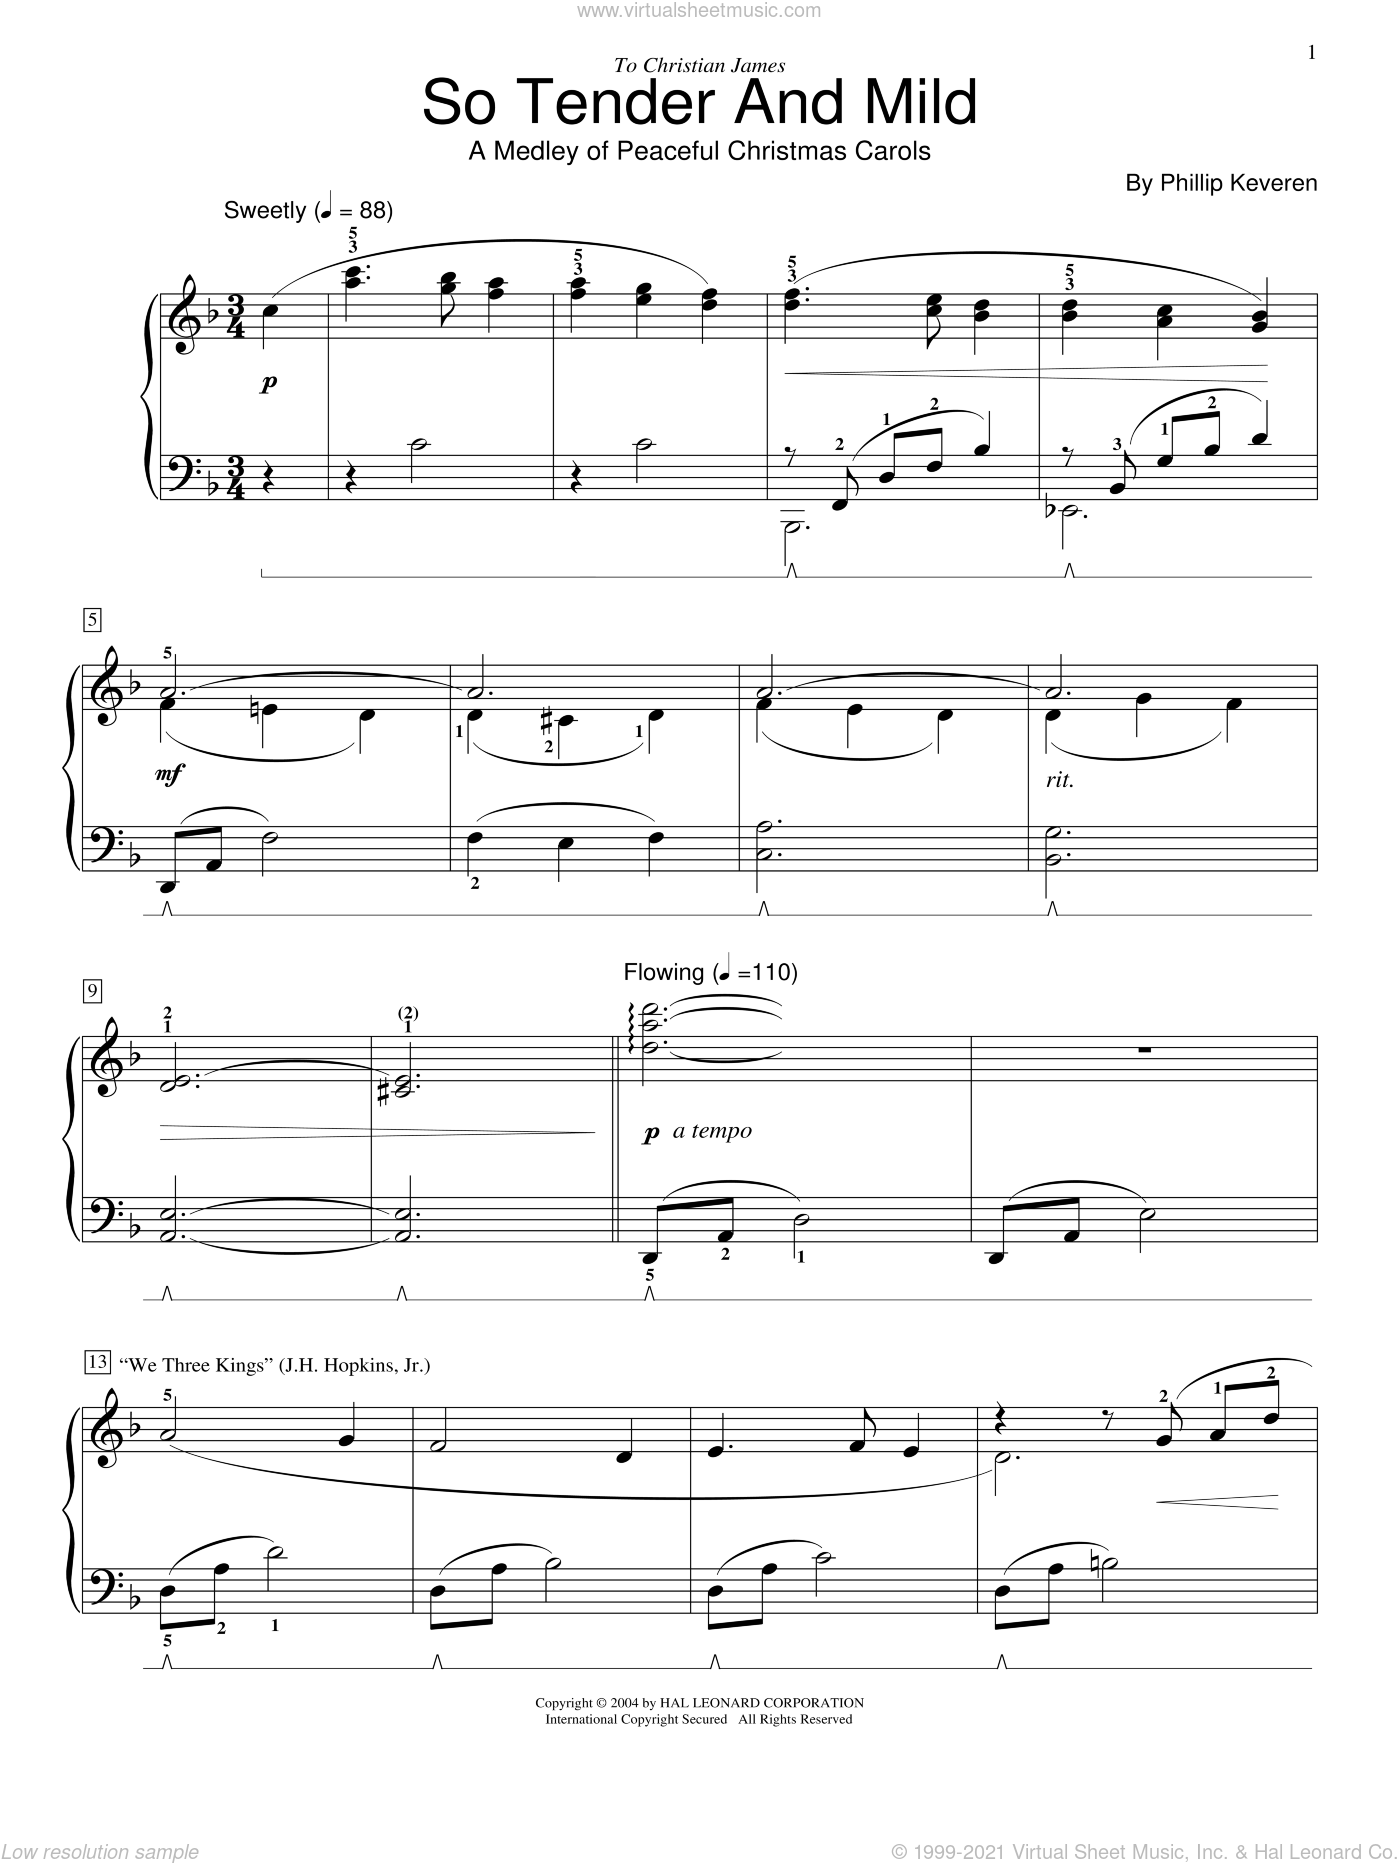 Keveren - So Tender And Mild - A Christmas Medley sheet music for piano